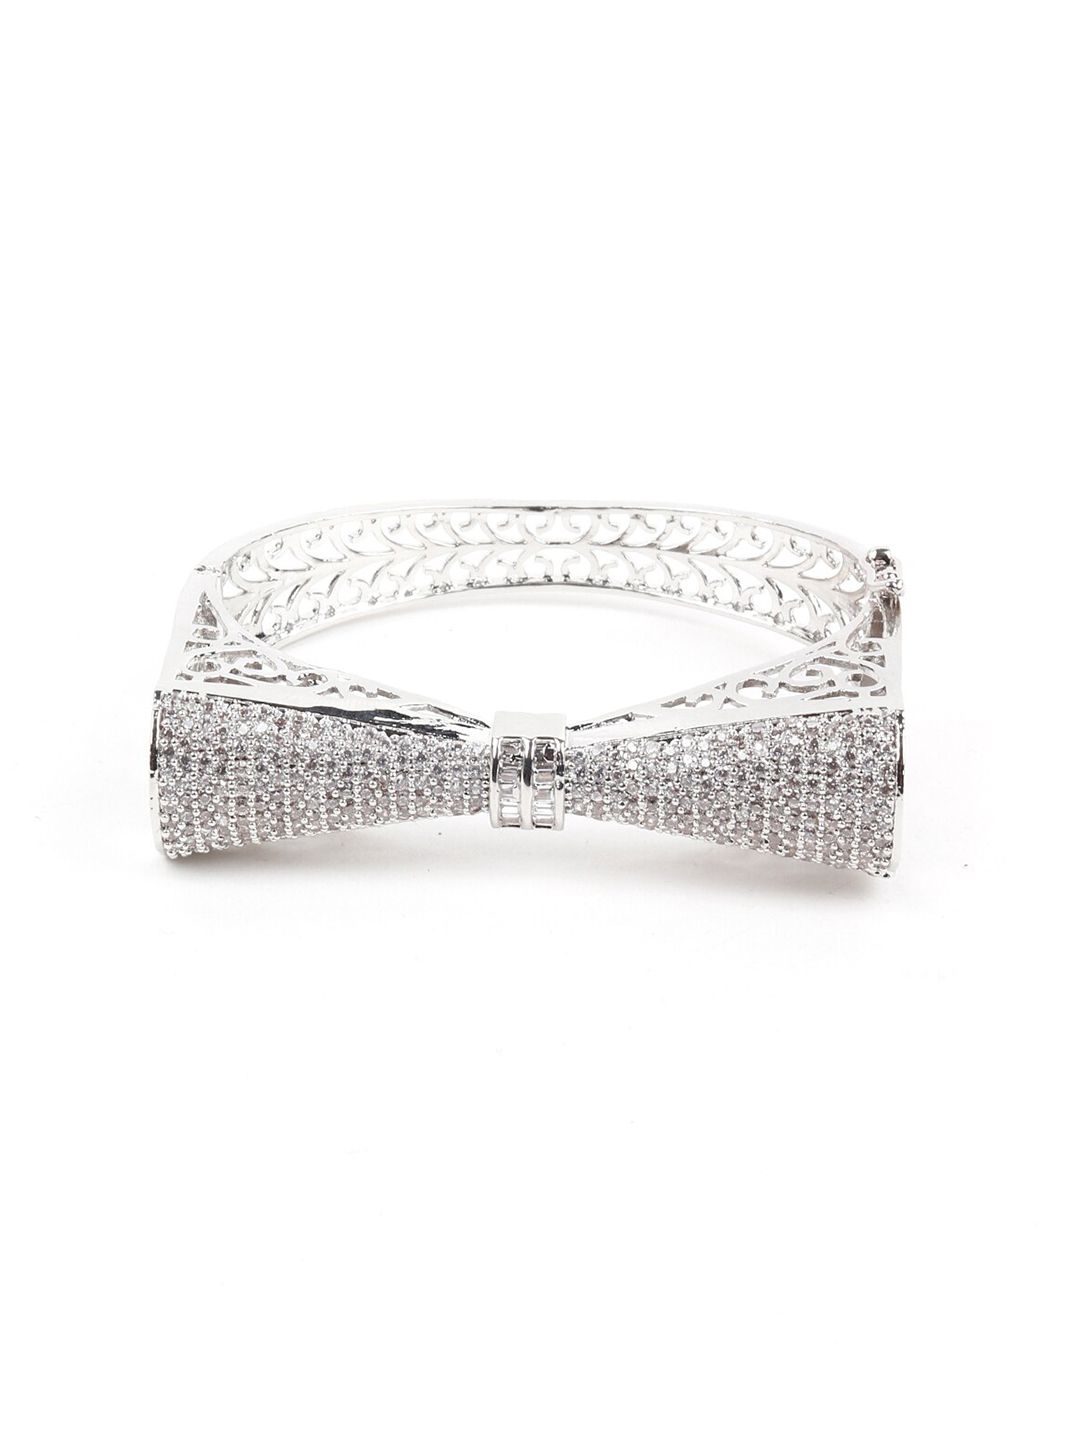 ODETTE Women Silver-Toned & White Bangle-Style Bracelet Price in India